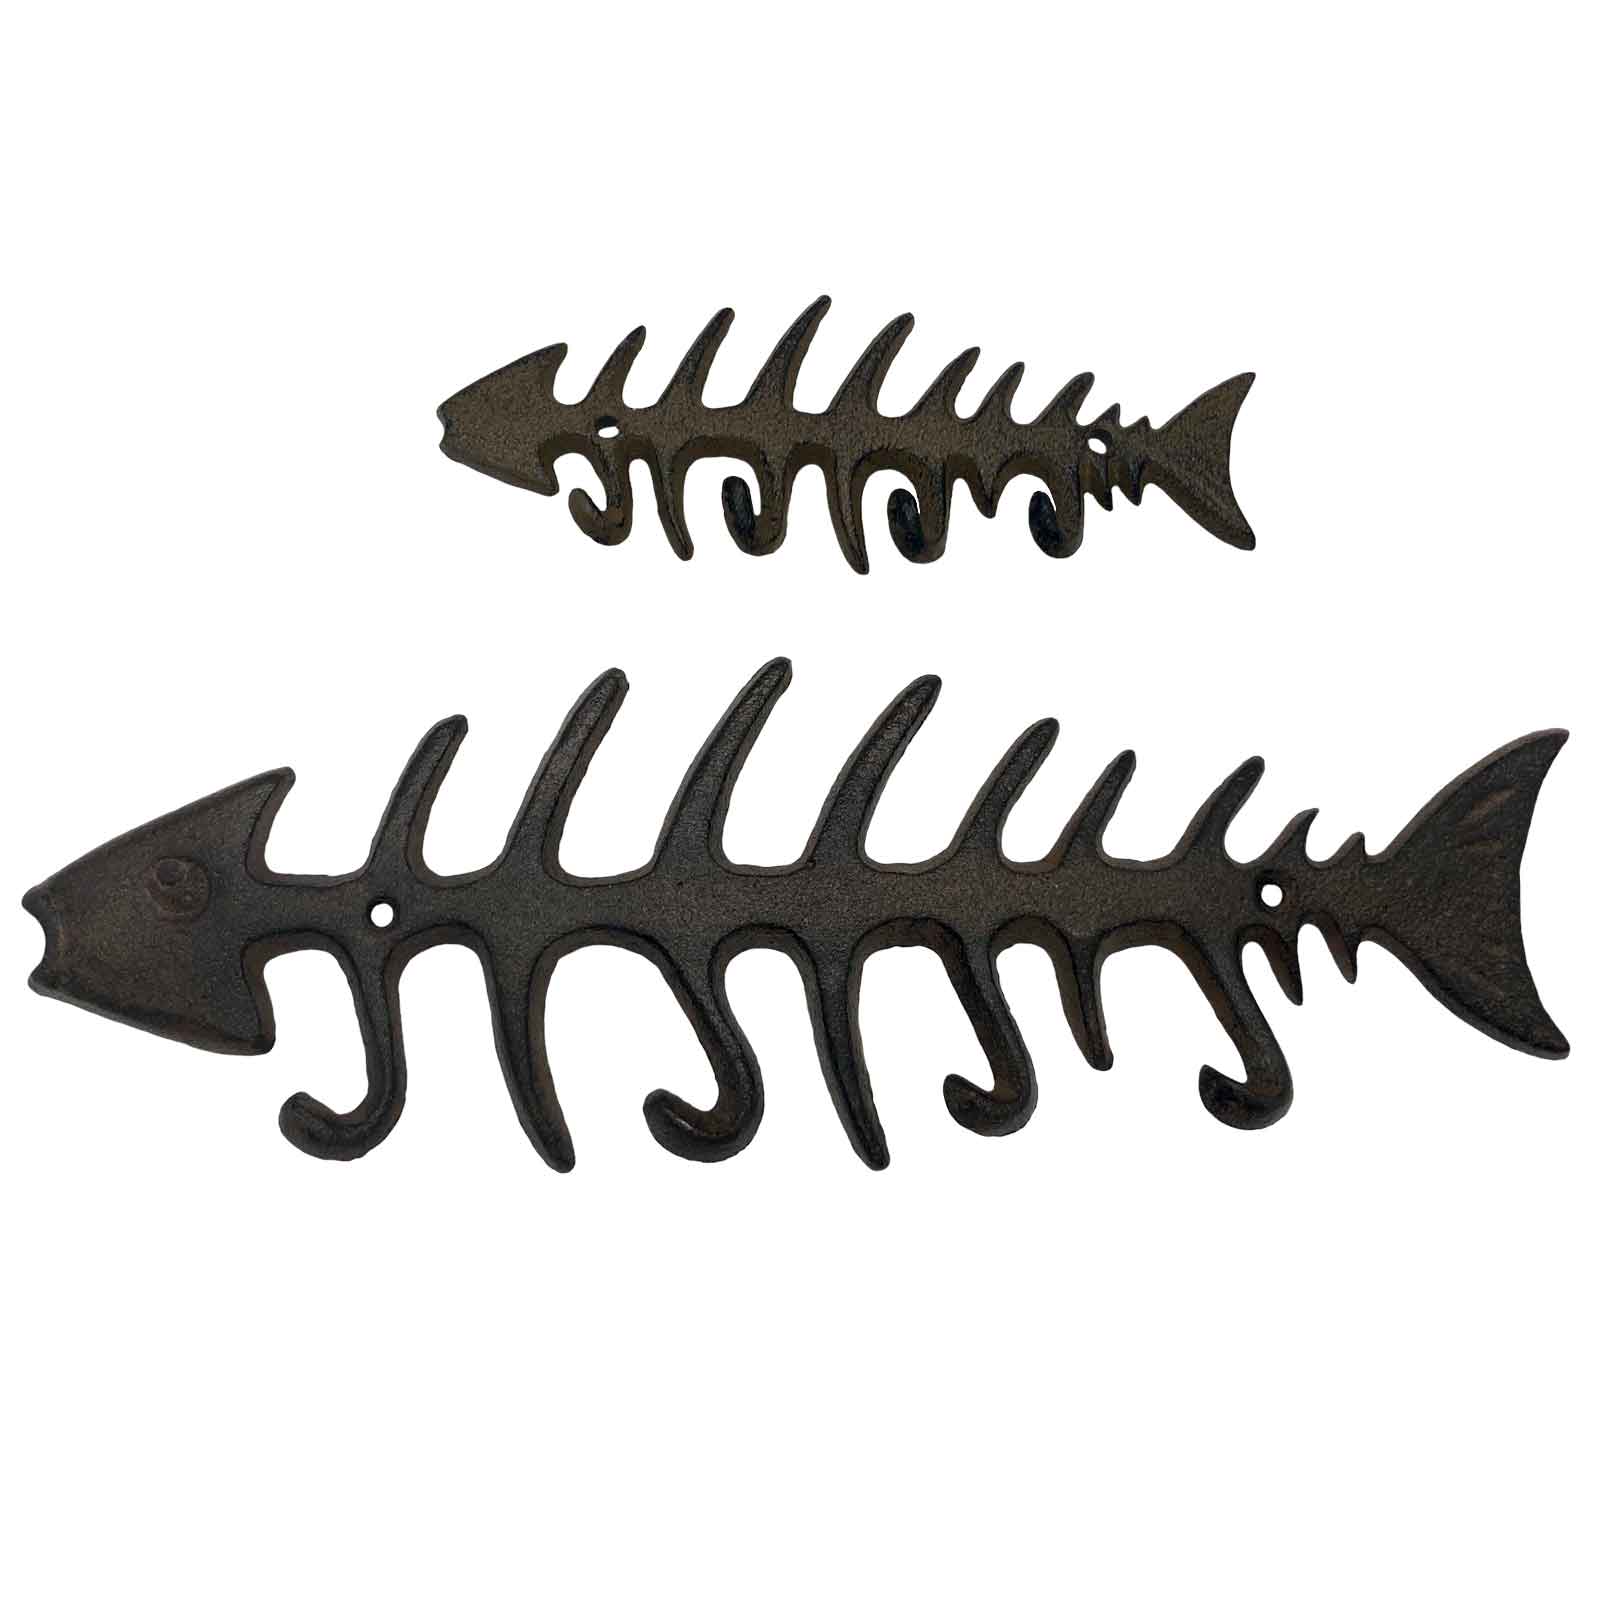 Fishbone Wall Hooks - 2 Sizes Available Large or Small